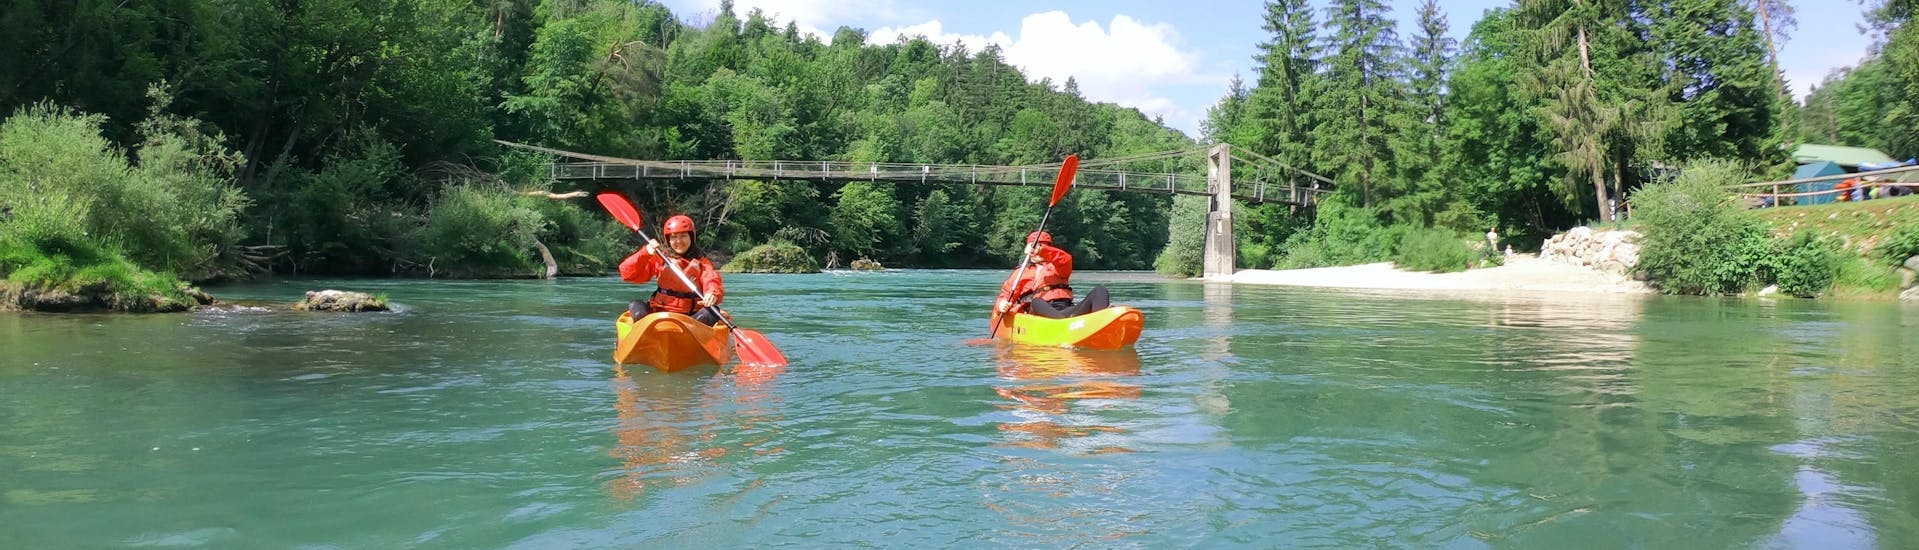 2 friends enjoying a 9 km Kayaking on the Dolinka River from Bled with Outdoor Slovenia Bled.